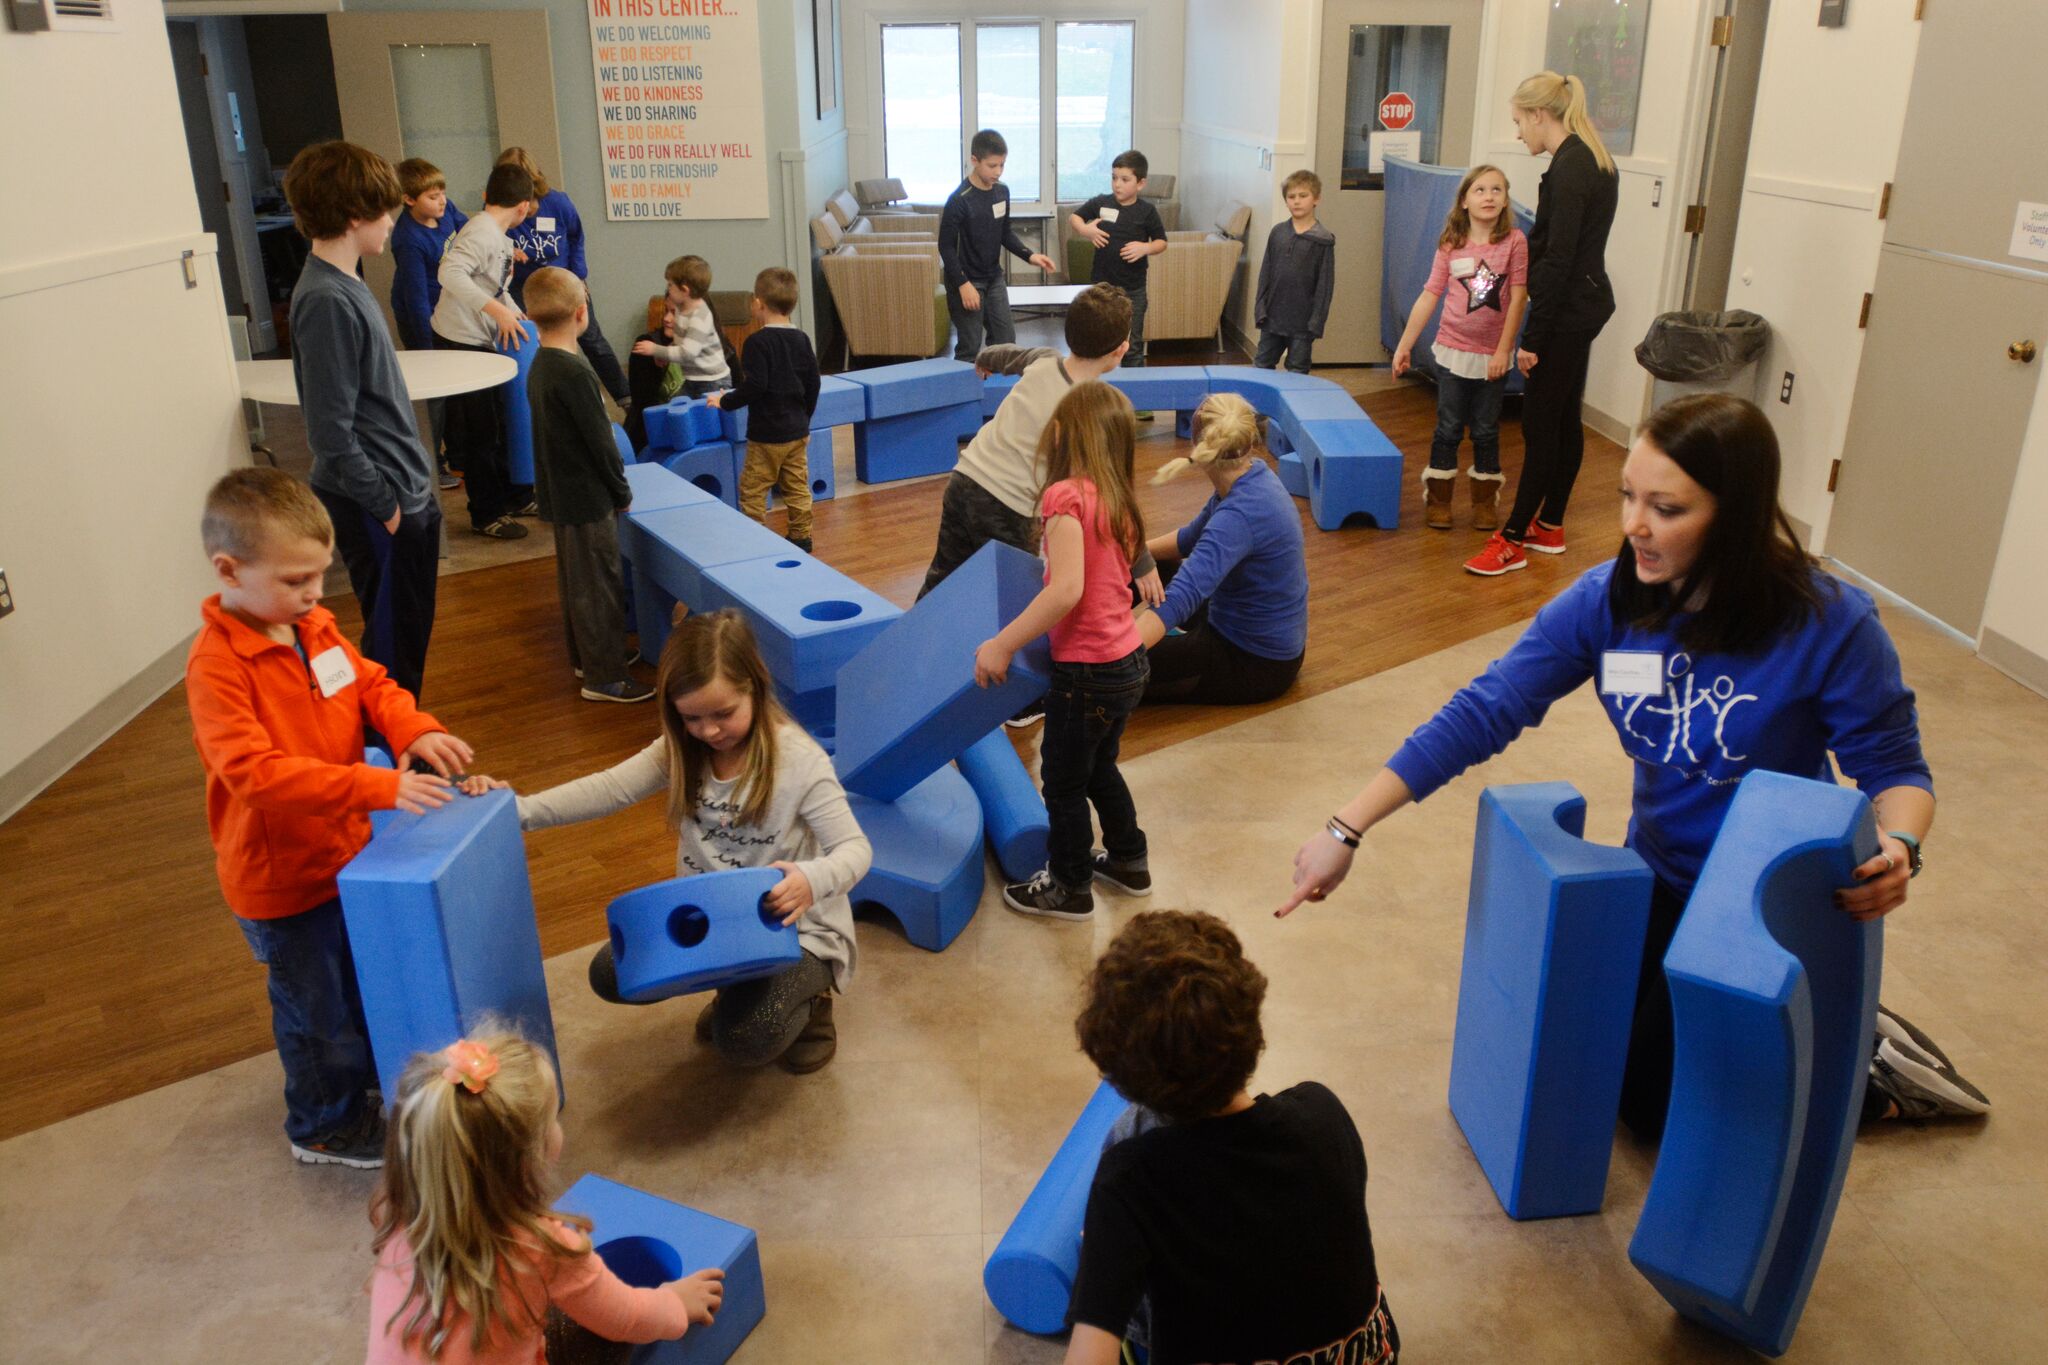 kids and adults playing with blue blocks